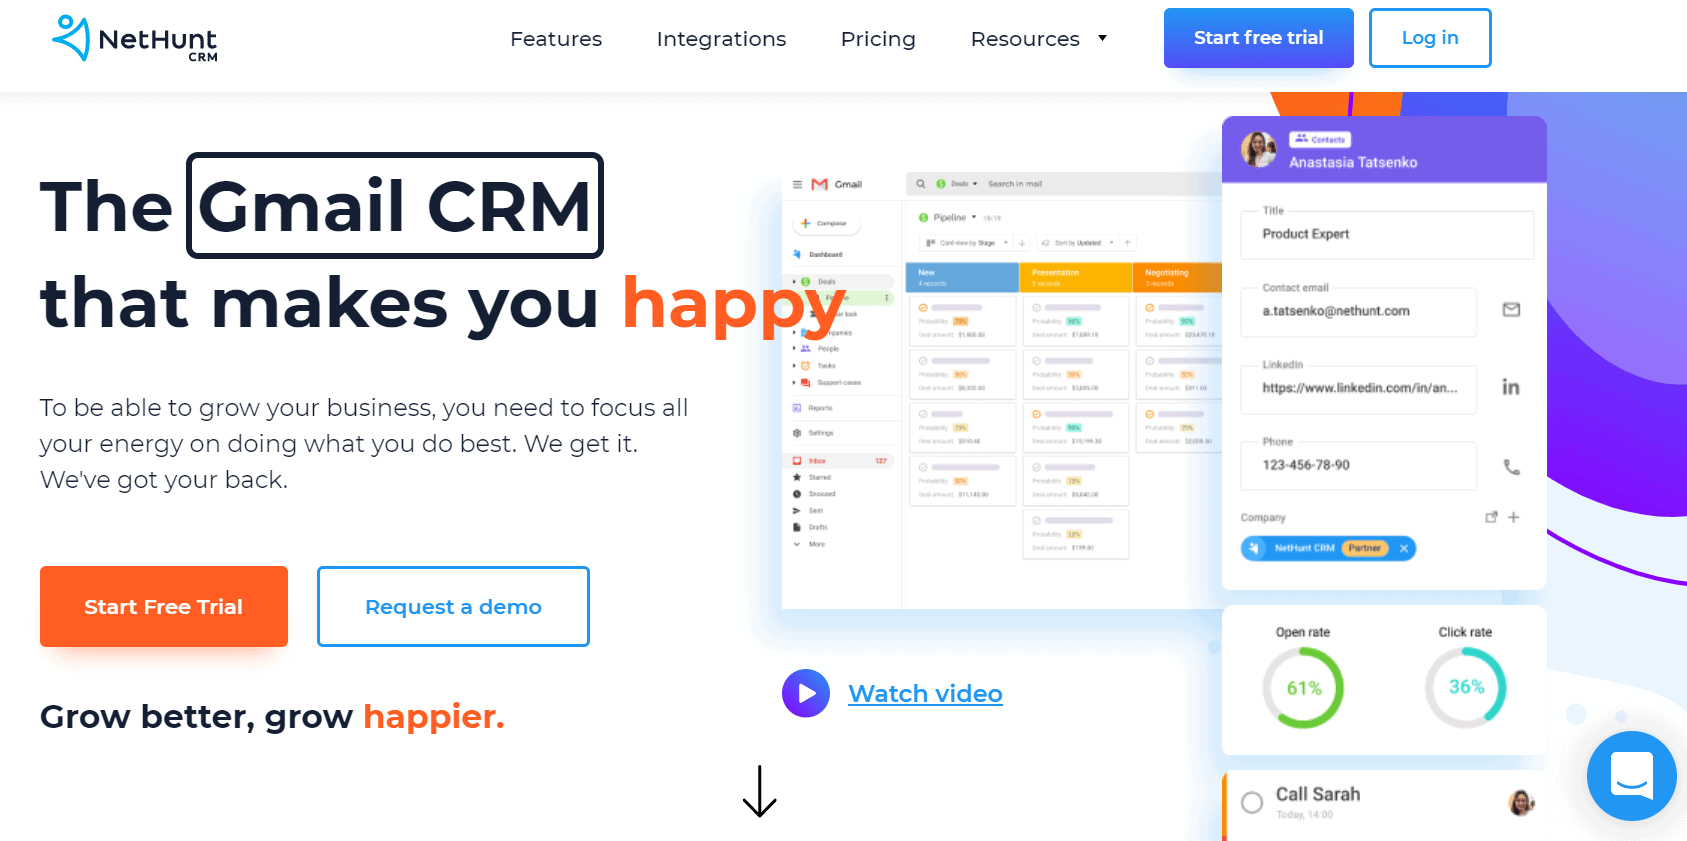 NetHunt CRM Review